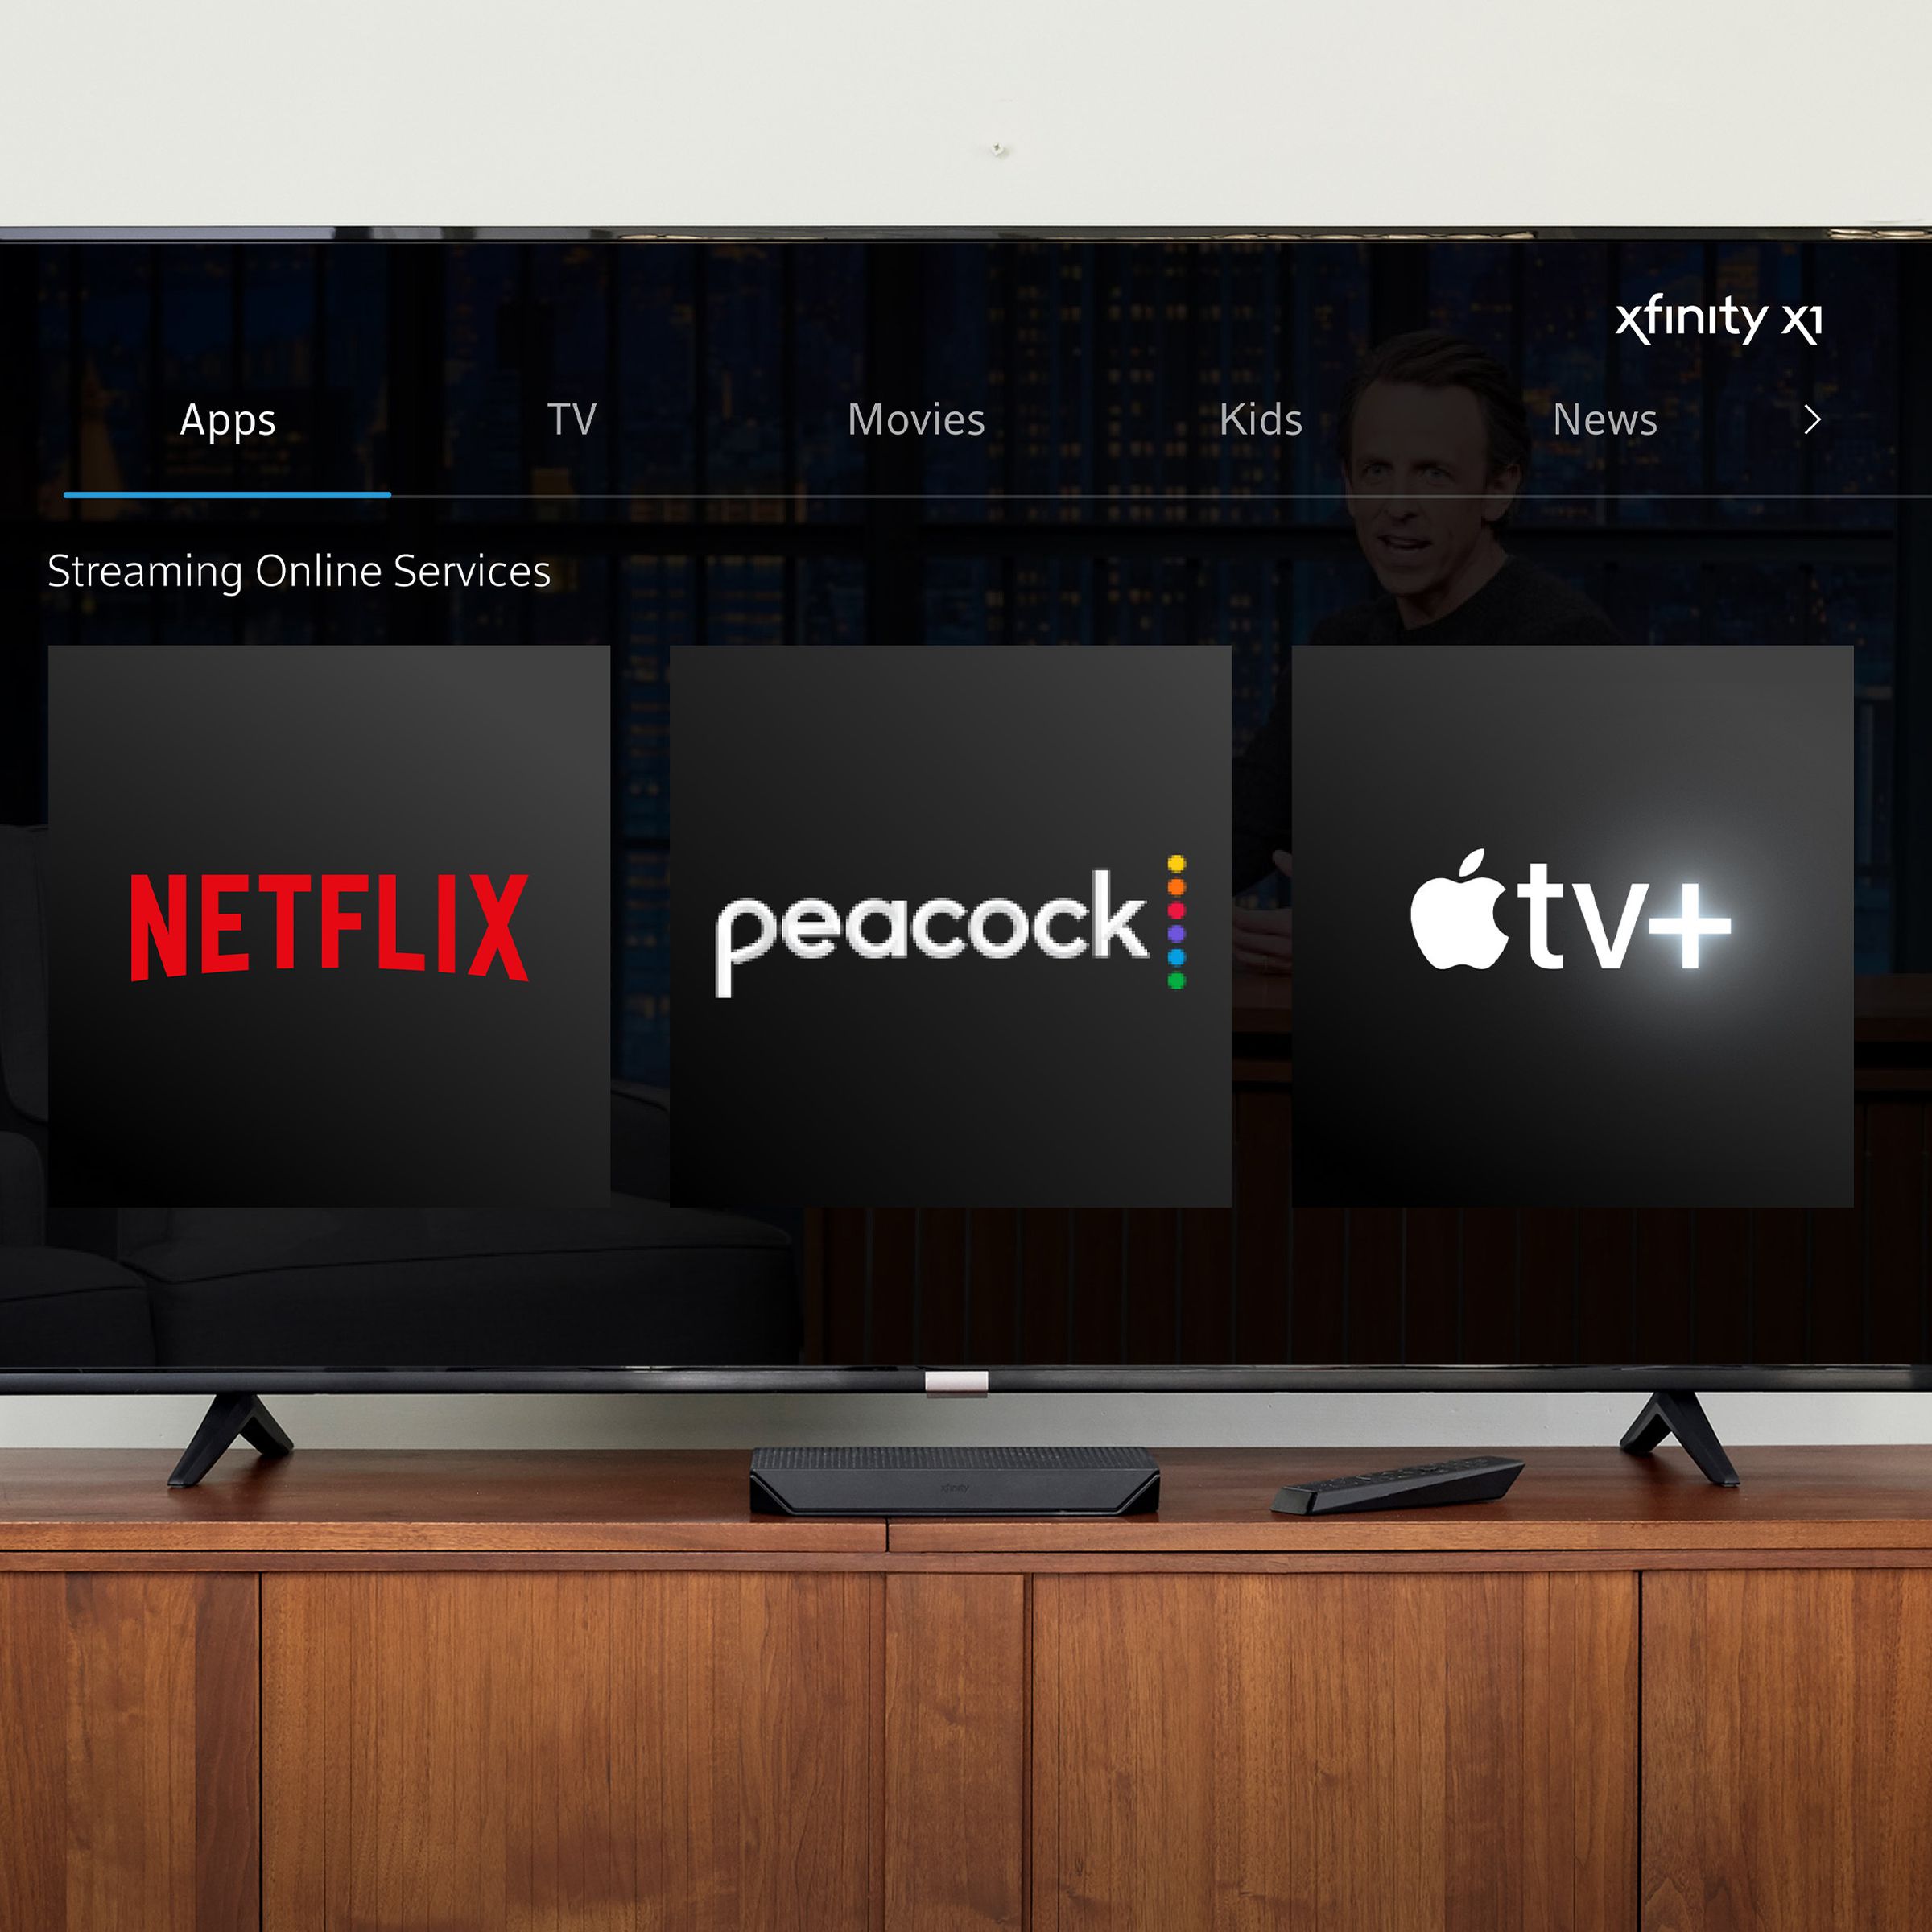 A photo showing Comcast, Peacock, and Apple TV Plus icons on a TV screen